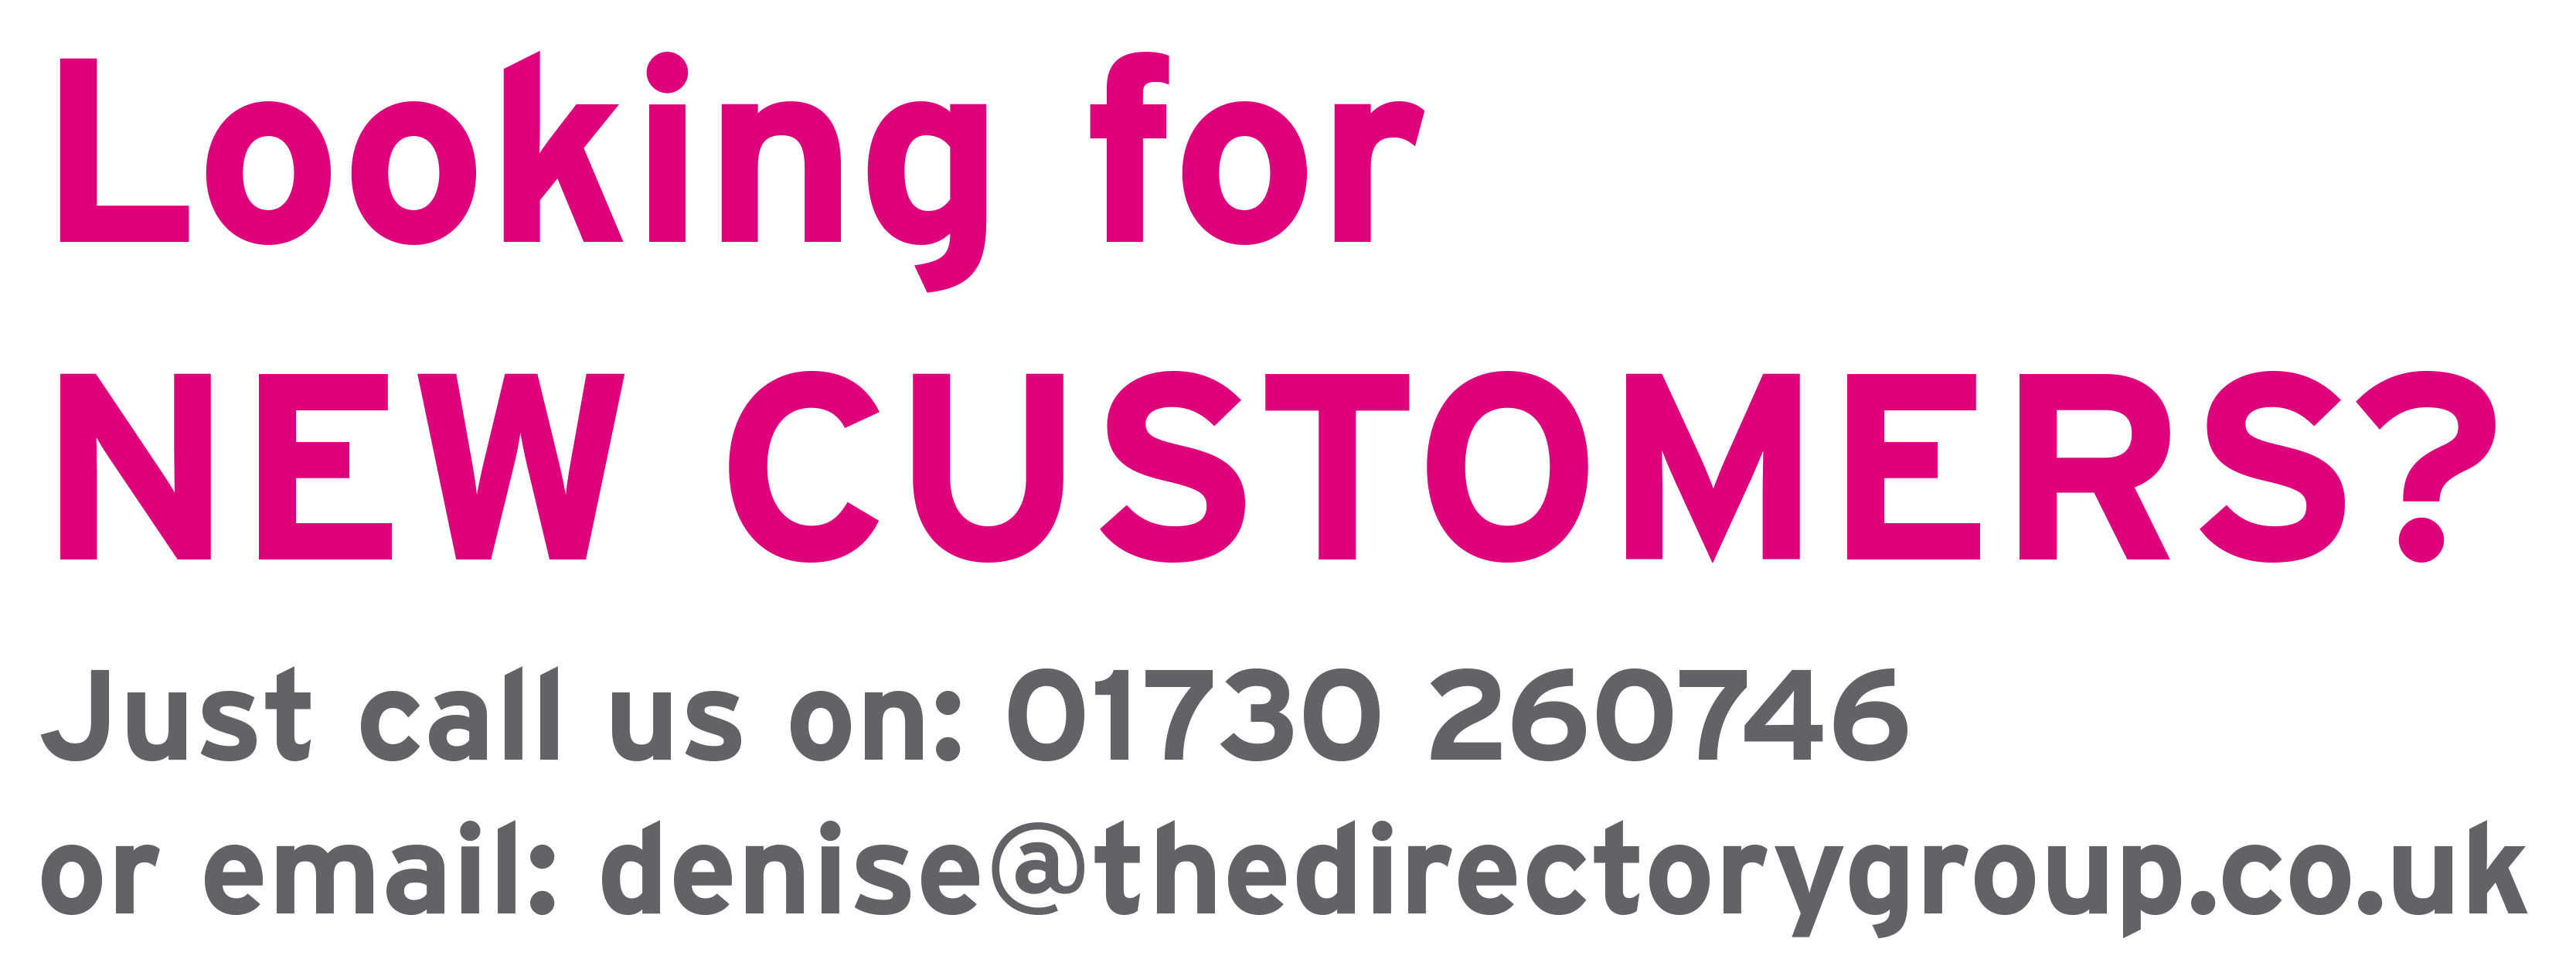 Looking for new customers? Just call 01730 260746 or email sales@thedirectorygroup.co.uk